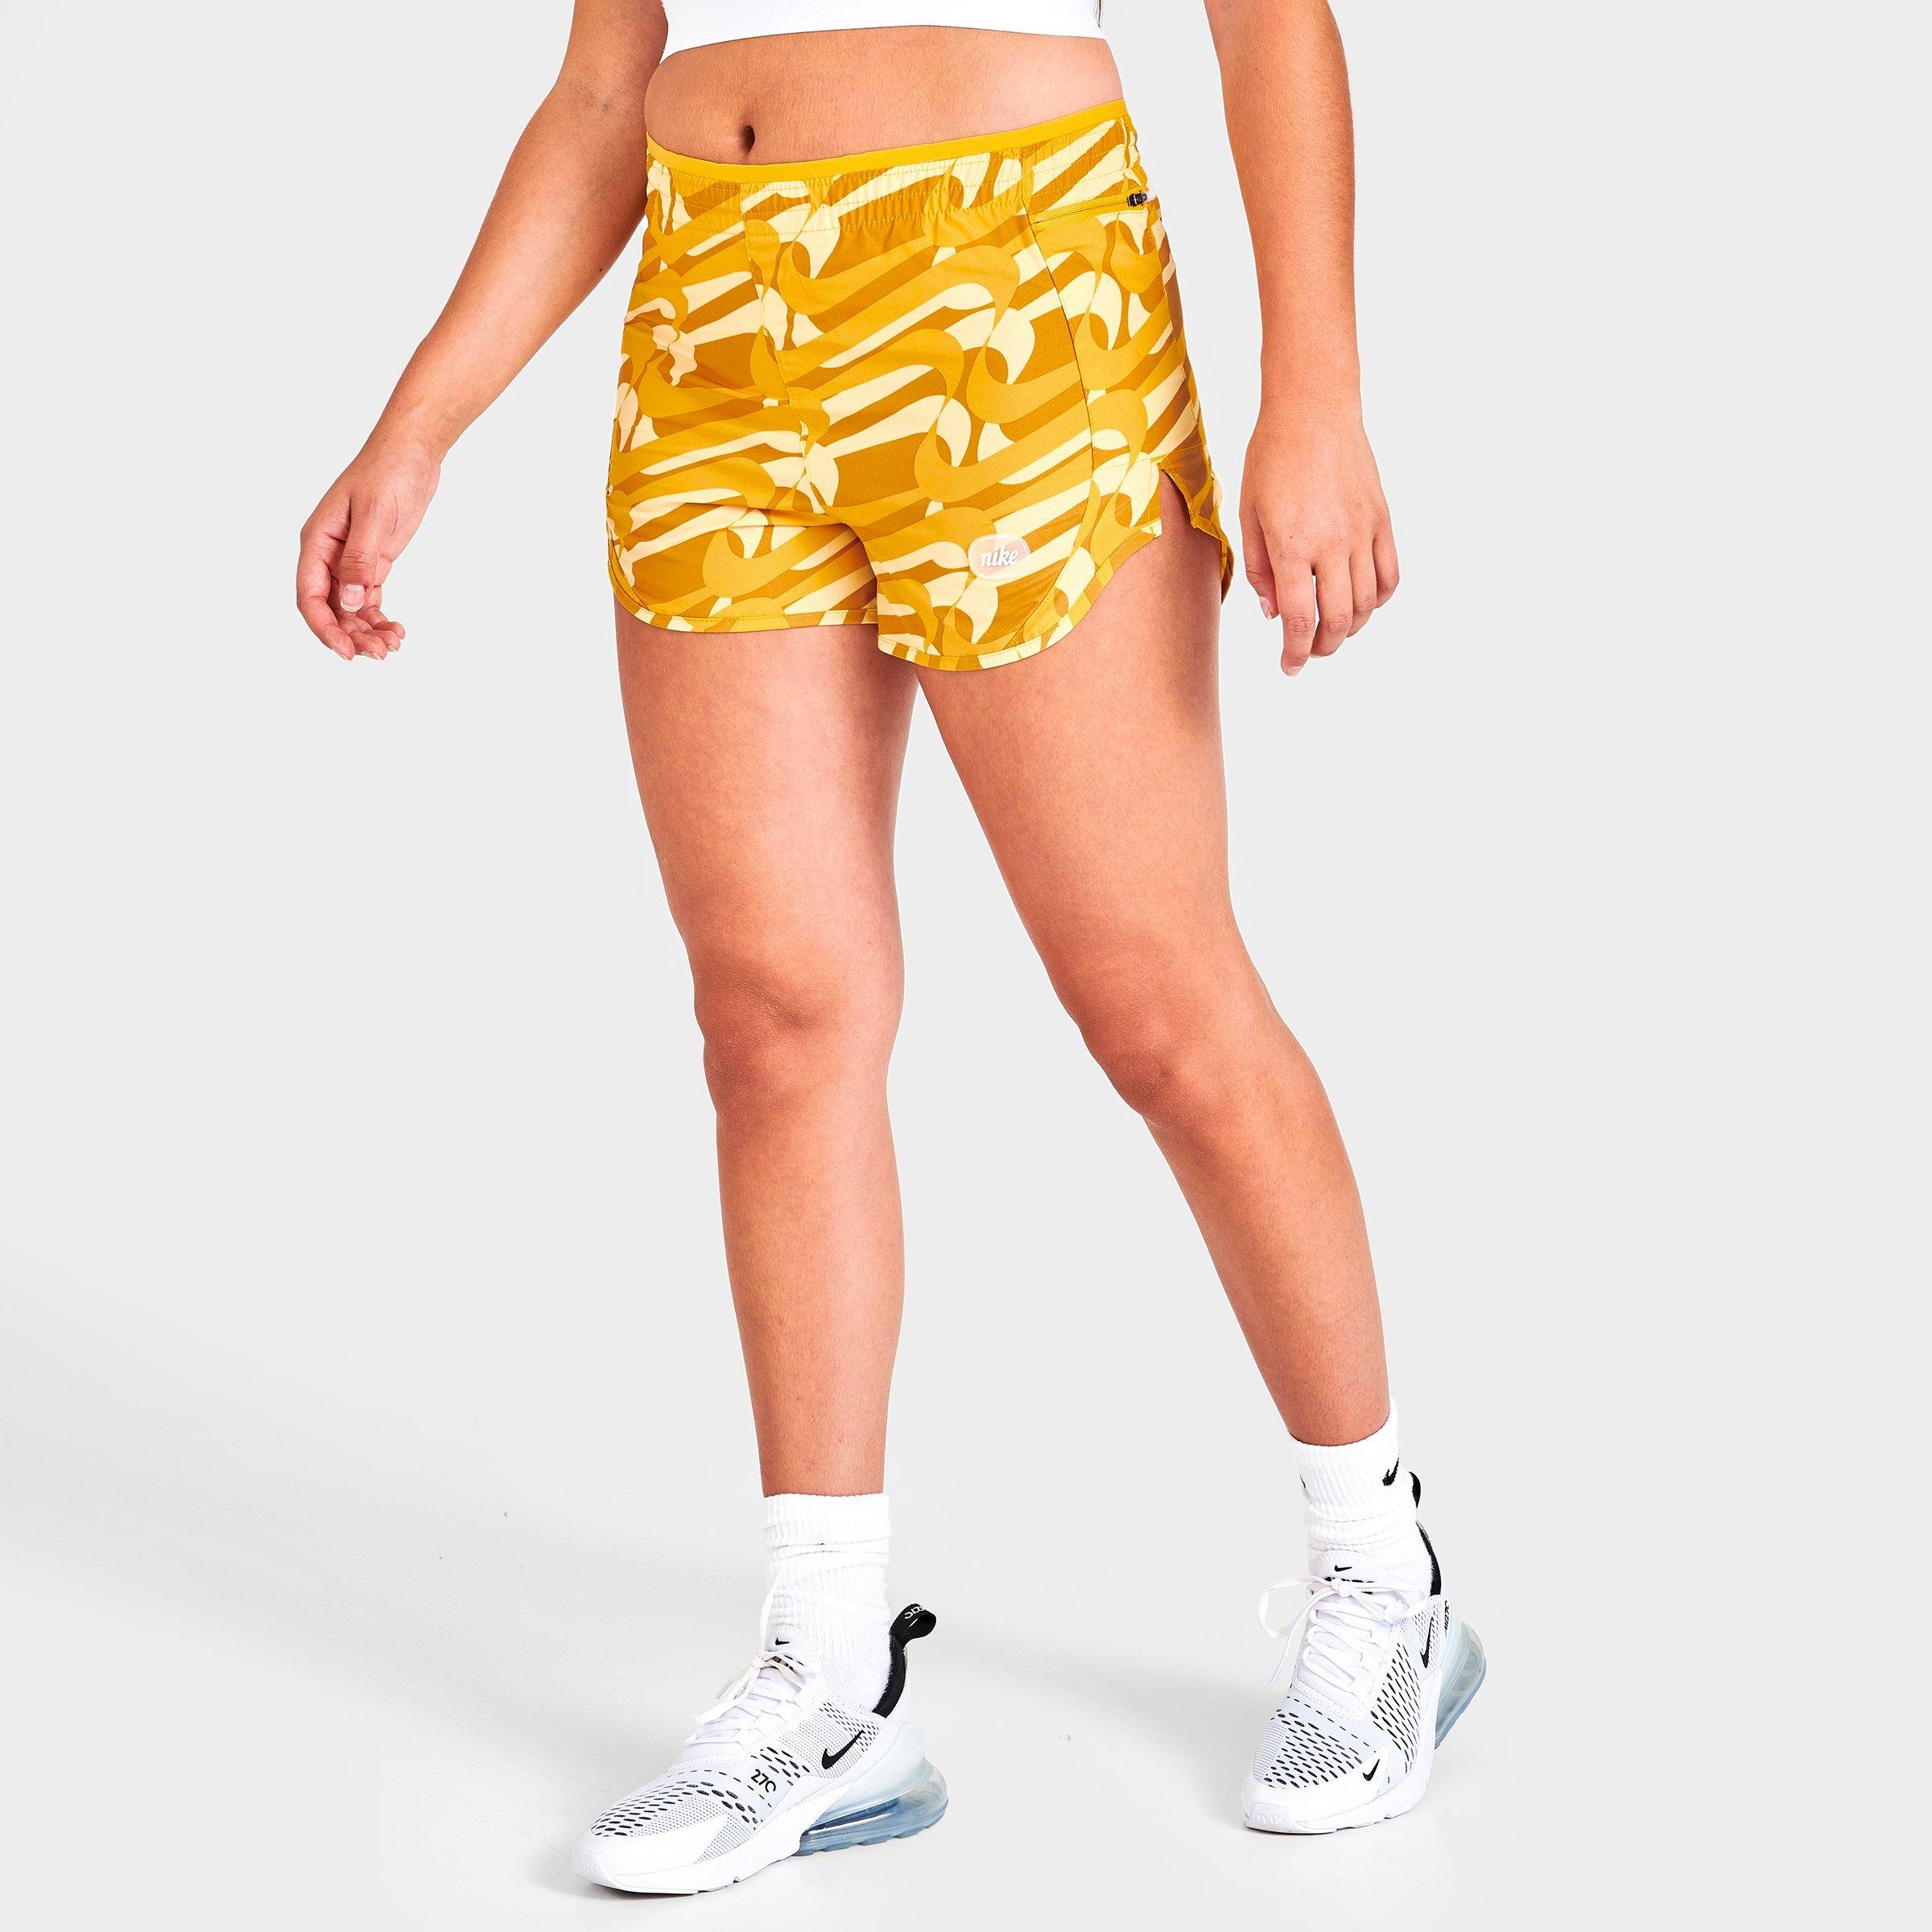 UPC 196149000138 product image for Nike Women's Dri-FIT Icon Clash Tempo Luxe Printed Running Shorts in Yellow/Yell | upcitemdb.com